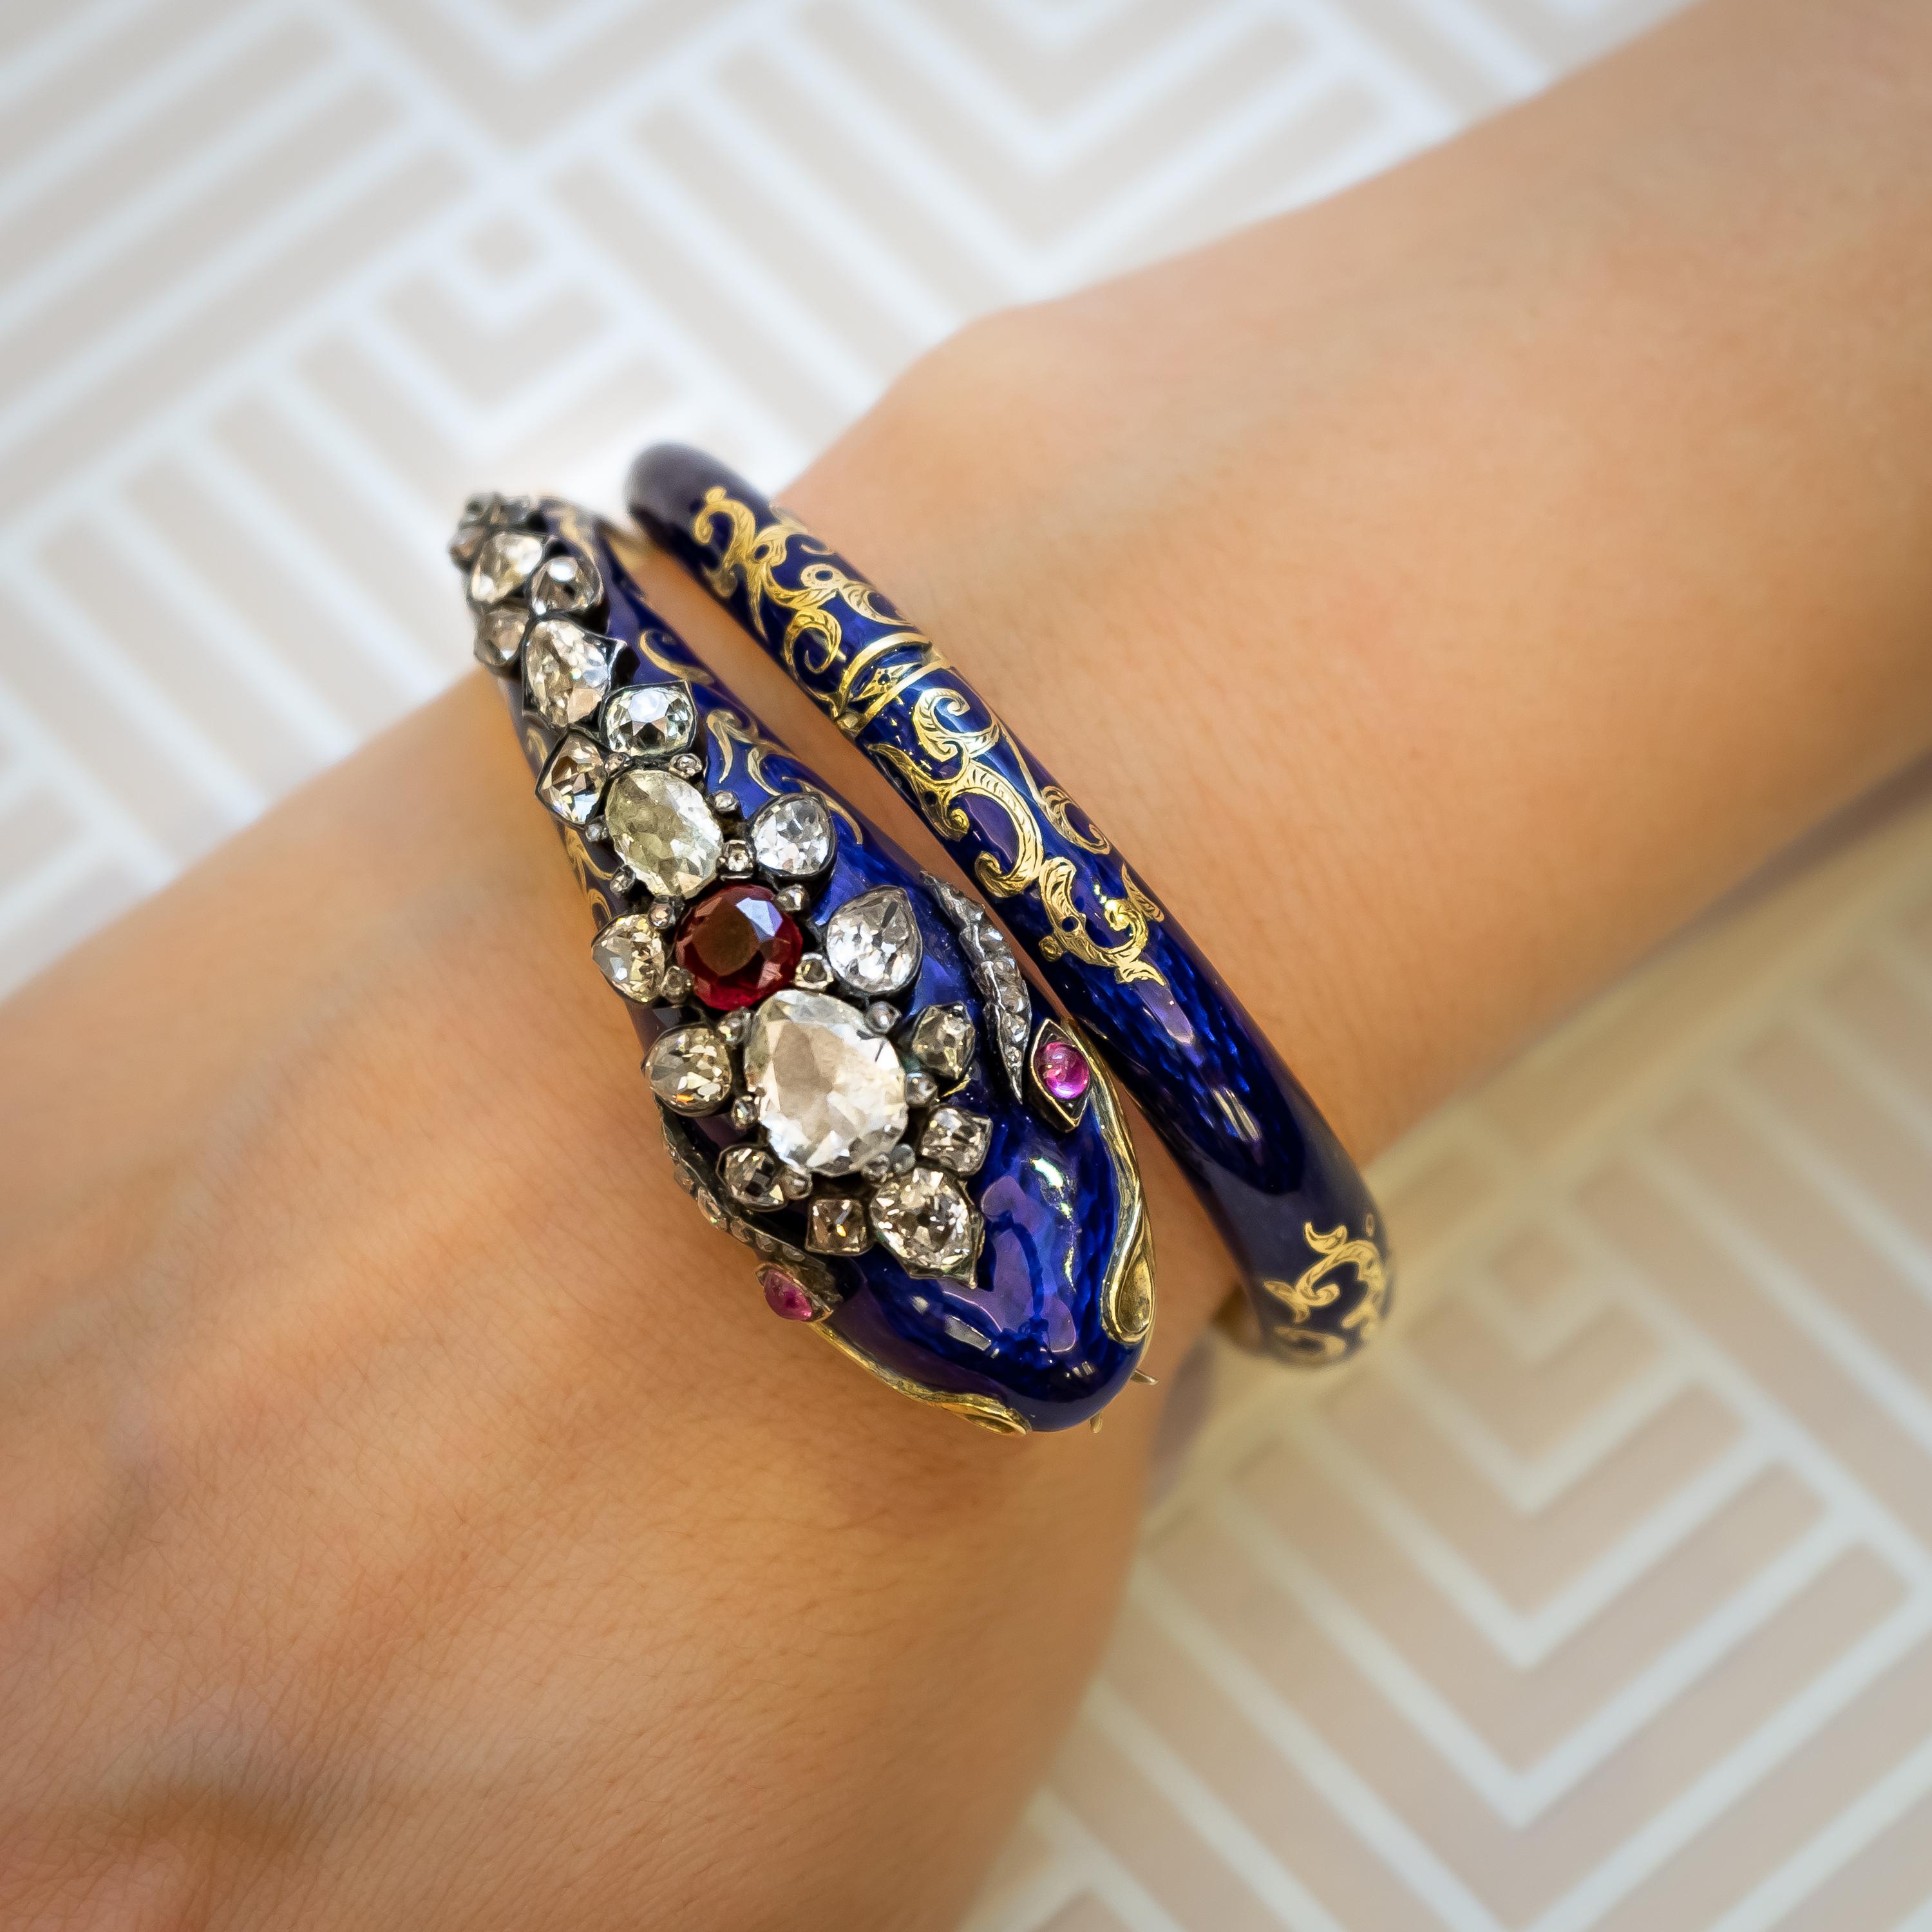 An antique snake bangle, with blue enamel on gold, with gold engravings either side of the four hinges. The head is set with old-cut and rose-cut diamonds, with a total weight of approximately 5.50ct, cabochon ruby eyes and a red garnet topped